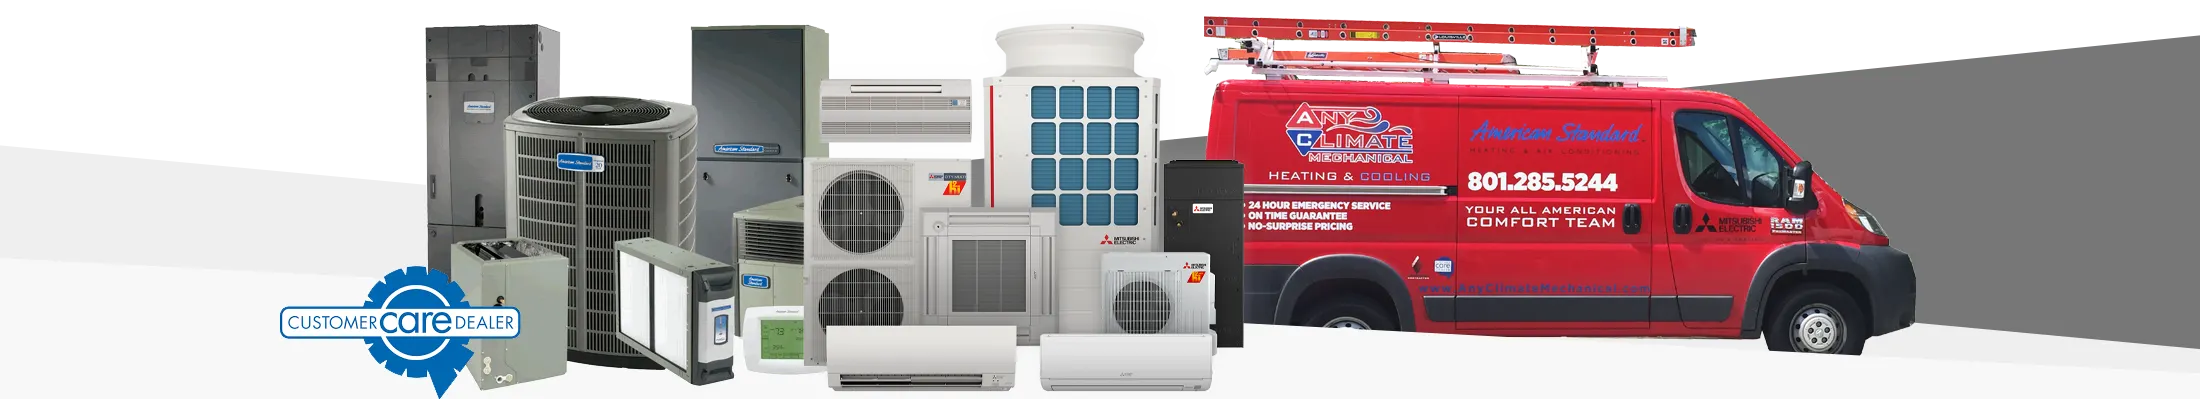 When we service your Furnace in South Jordan UT, your satifaction means the world to us.